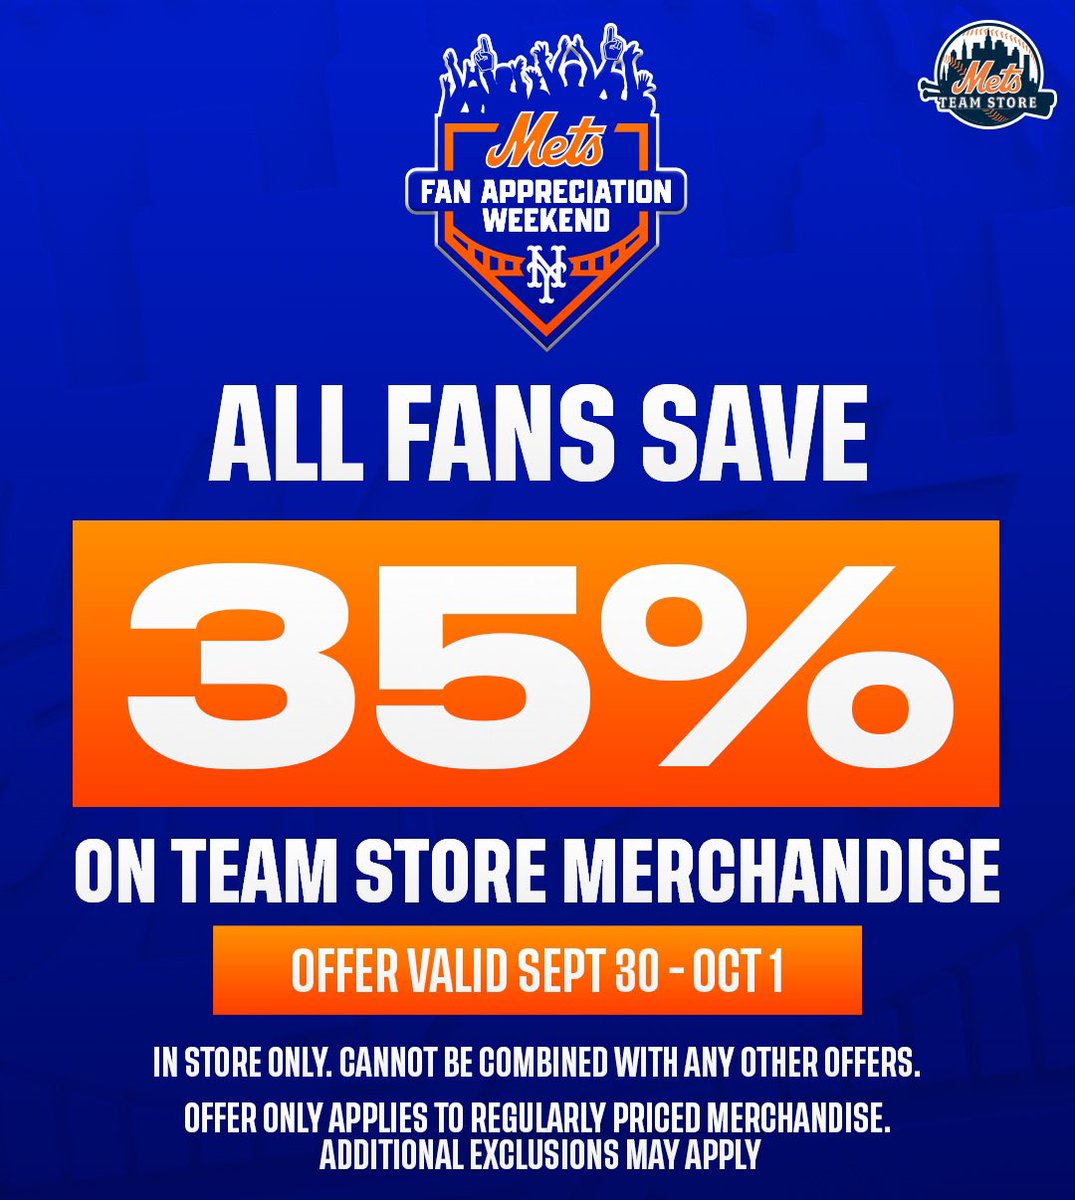 Mets Team Store on X: Ready to go! @Mets @CitiField #OpeningDay